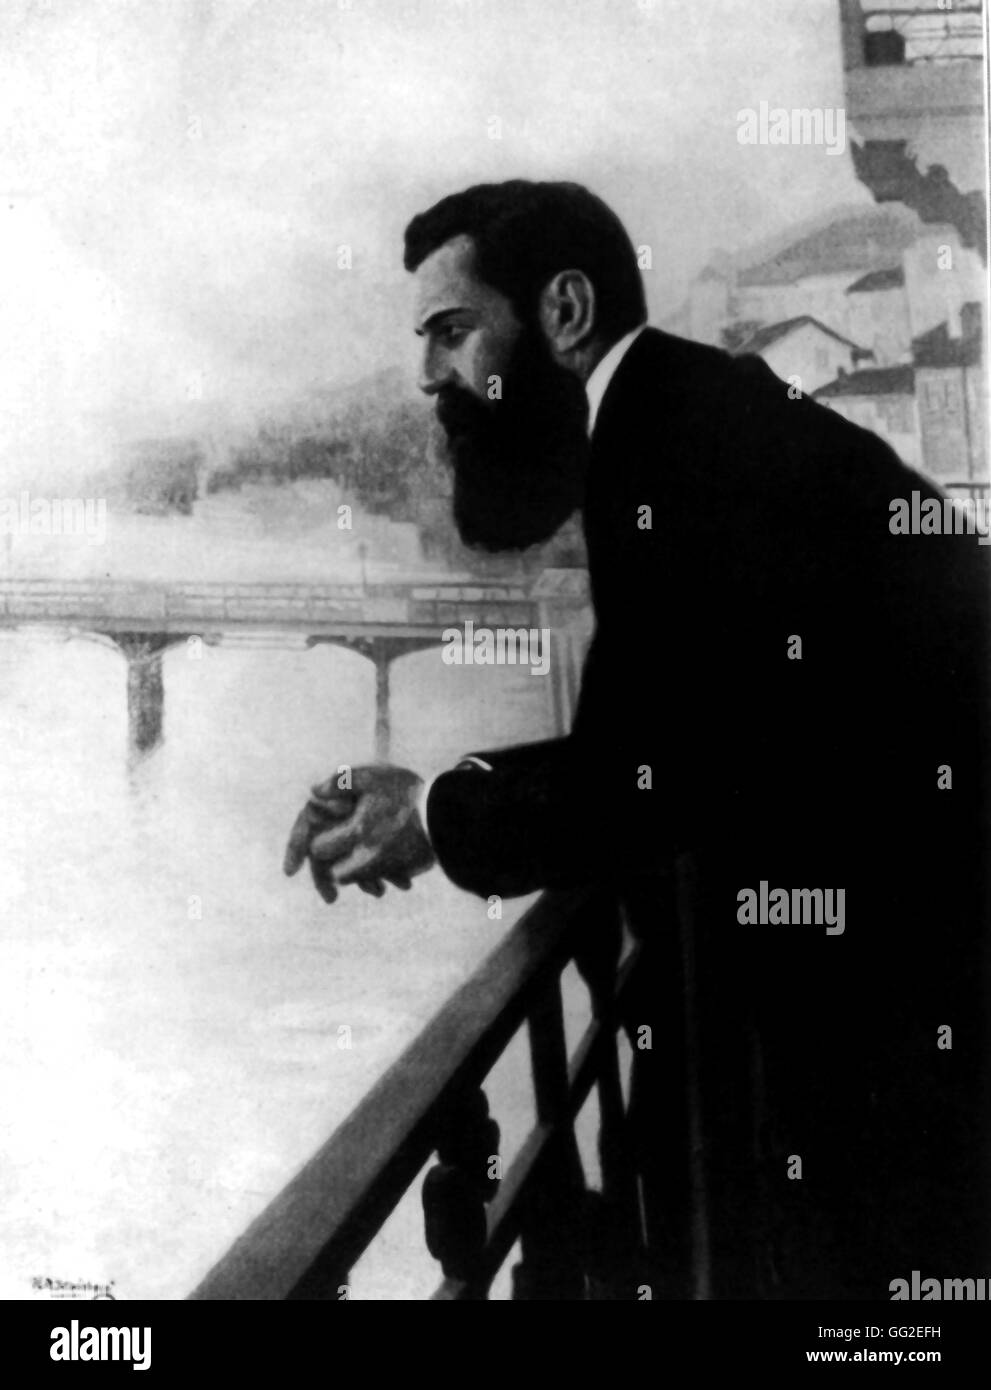 Herzl on a bridge in Basle during the 5th Zionist congress Portrait by N.P. Steinberg after a photo by E.M. Lillien 19th century Zionism Bibliothèque de l'alliance israélite universelle Stock Photo